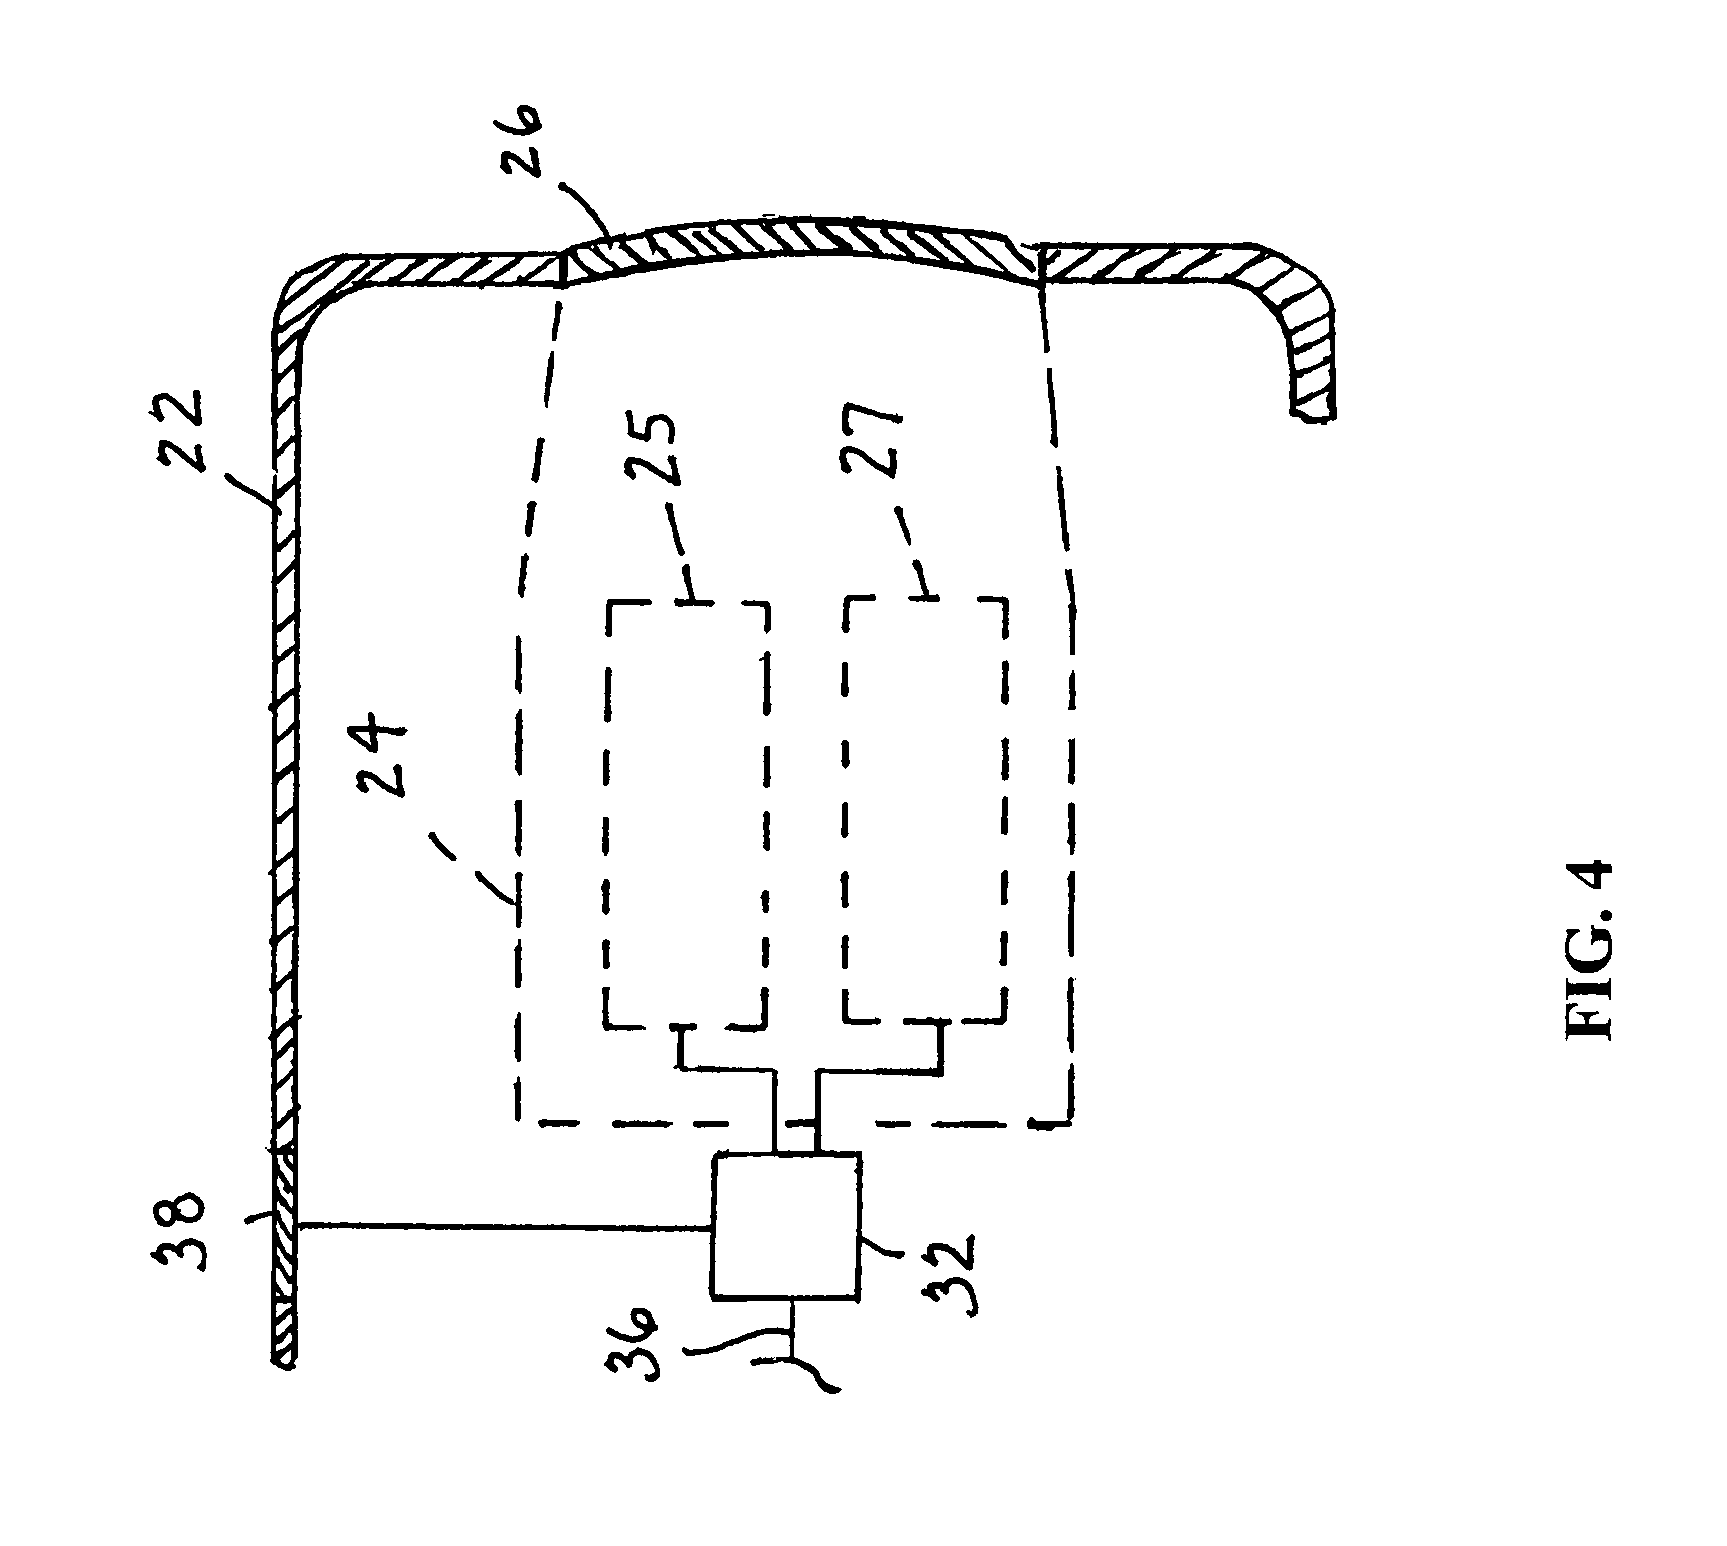 Medical device having a combination data reader and infrared data transceiver and method of using same